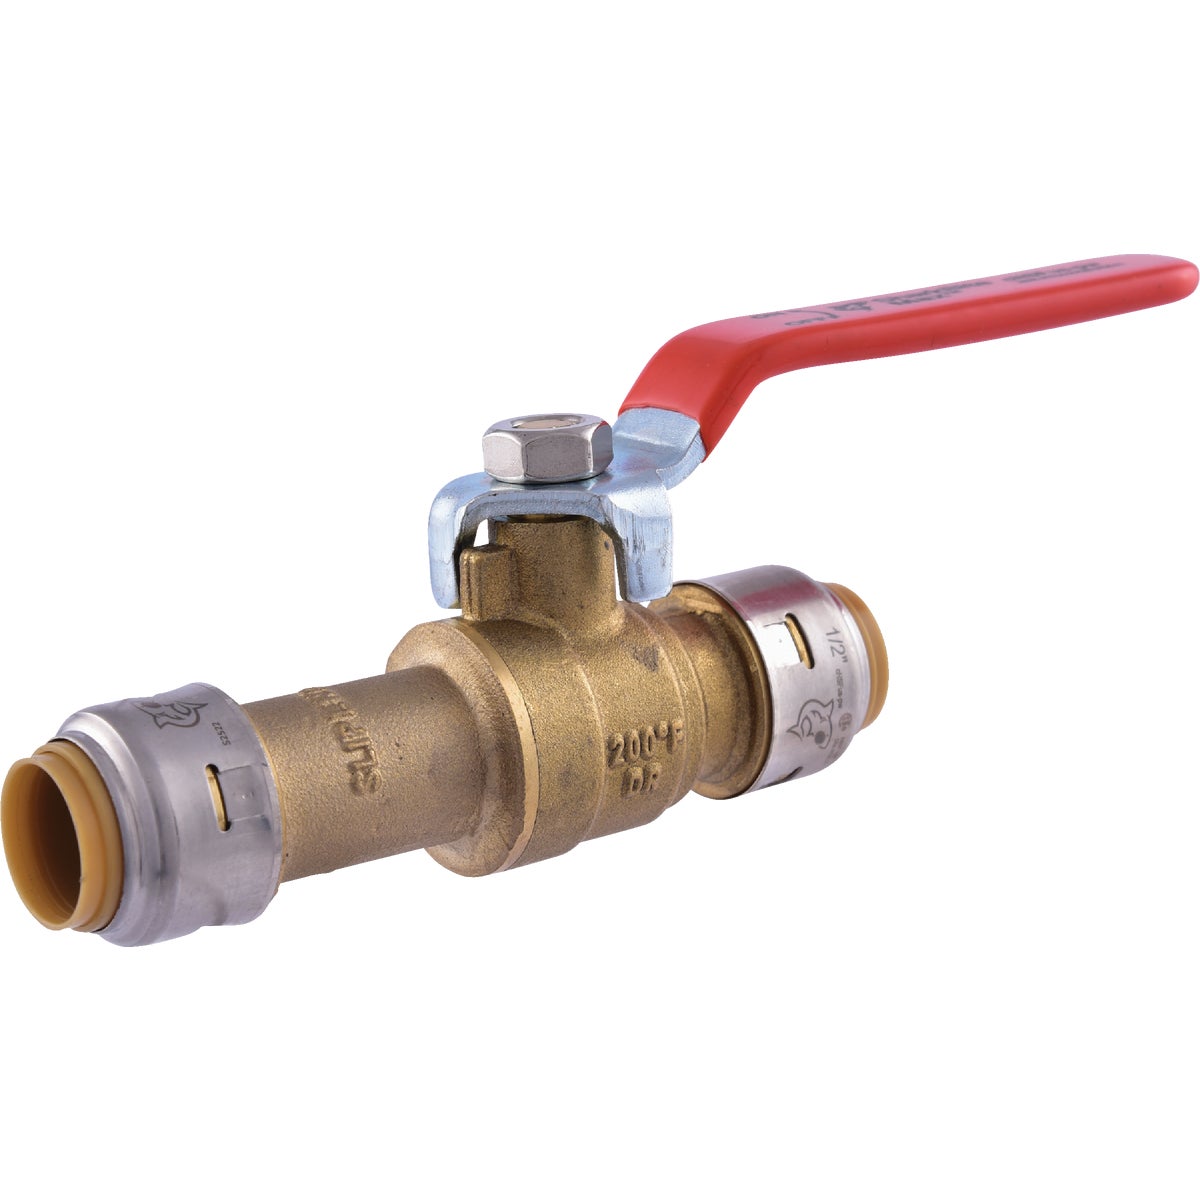 Item 404054, SharkBite Slip Ball Valve is a high quality forged brass ball valve with 